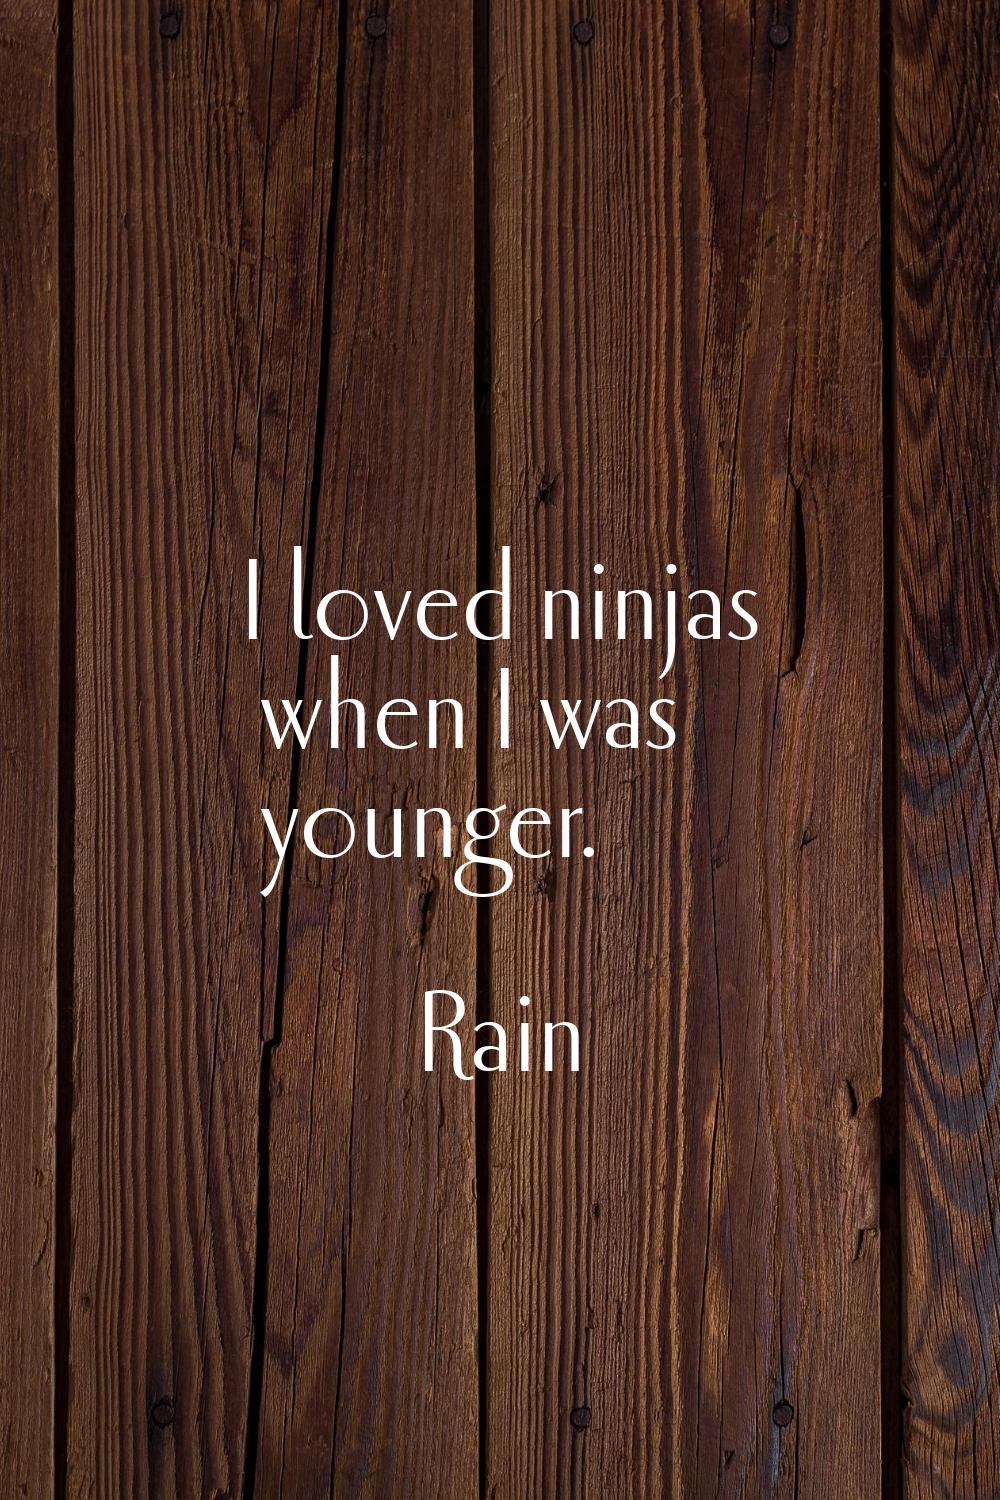 I loved ninjas when I was younger.